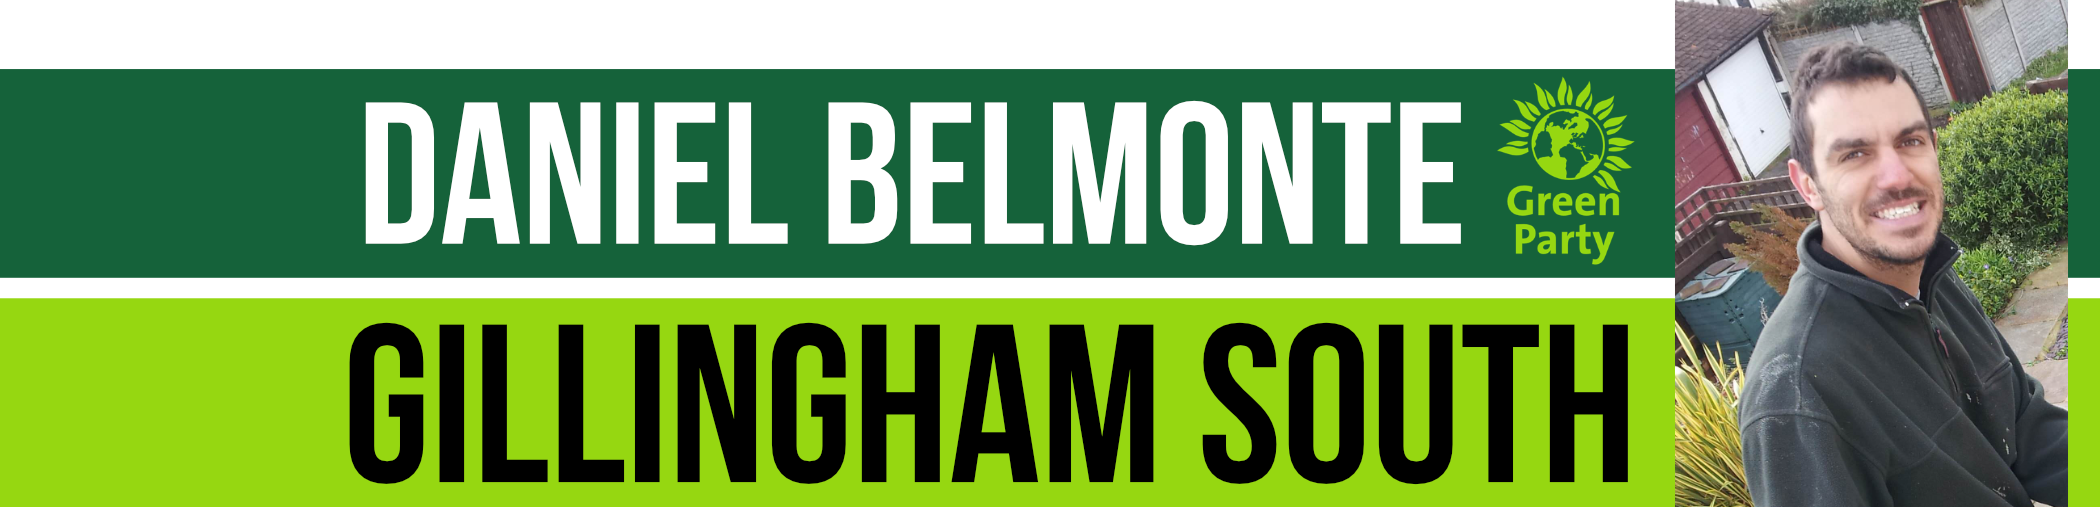 Daniel Belmonte is our Green Party candidate for Gillingham South in Medway Kent